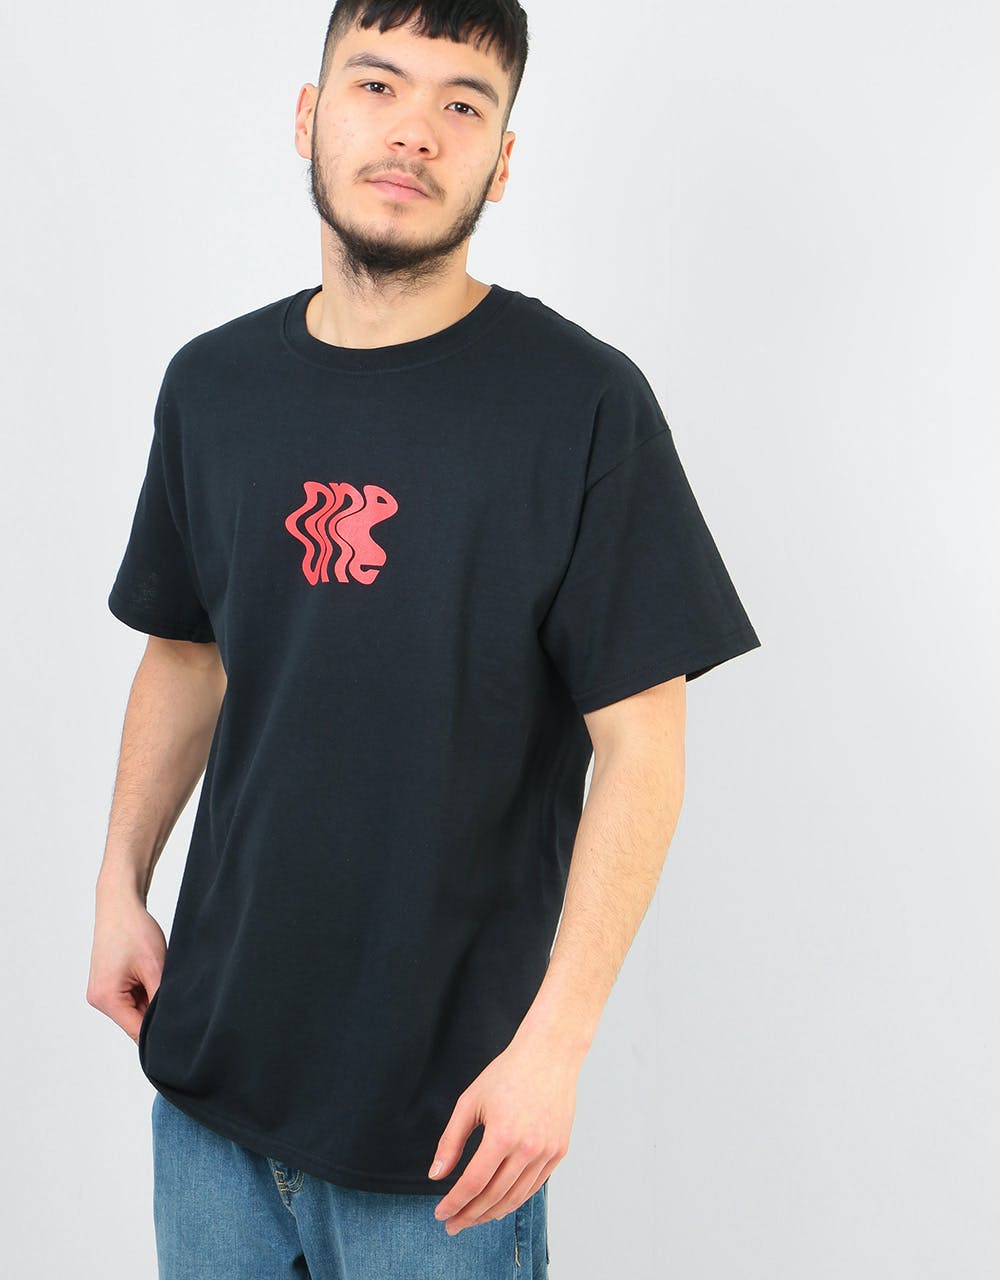 Route One Distorted T-Shirt- Black